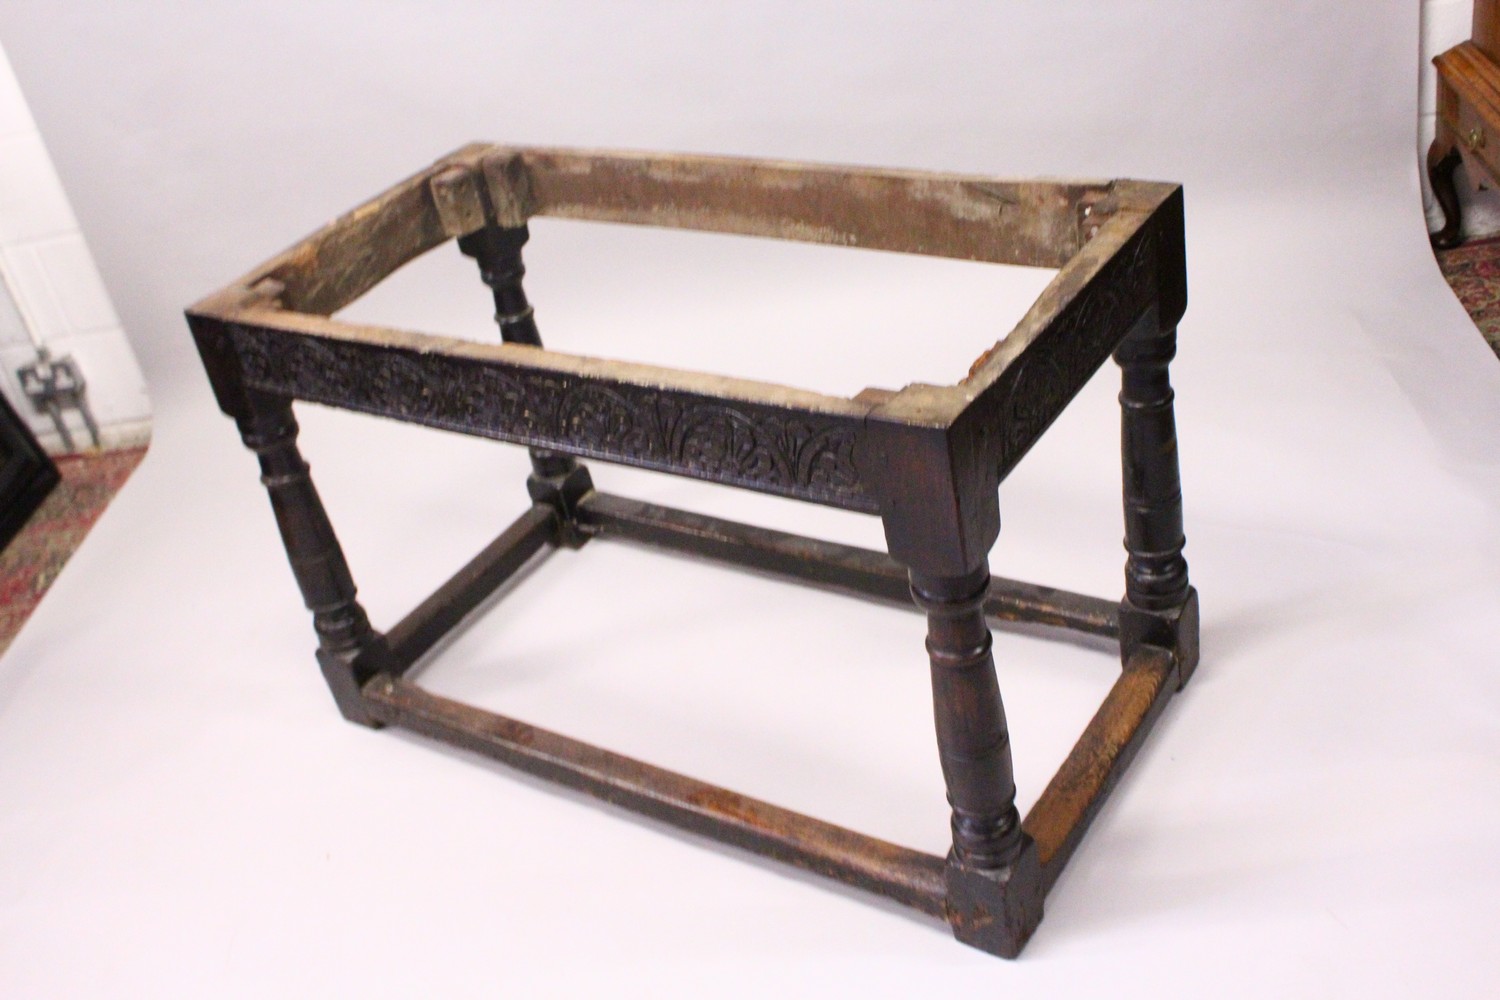 AN 18TH CENTURY OAK REFECTORY DINING TABLE, with a cleated twin plank top, on gun barrel turned legs - Image 11 of 14